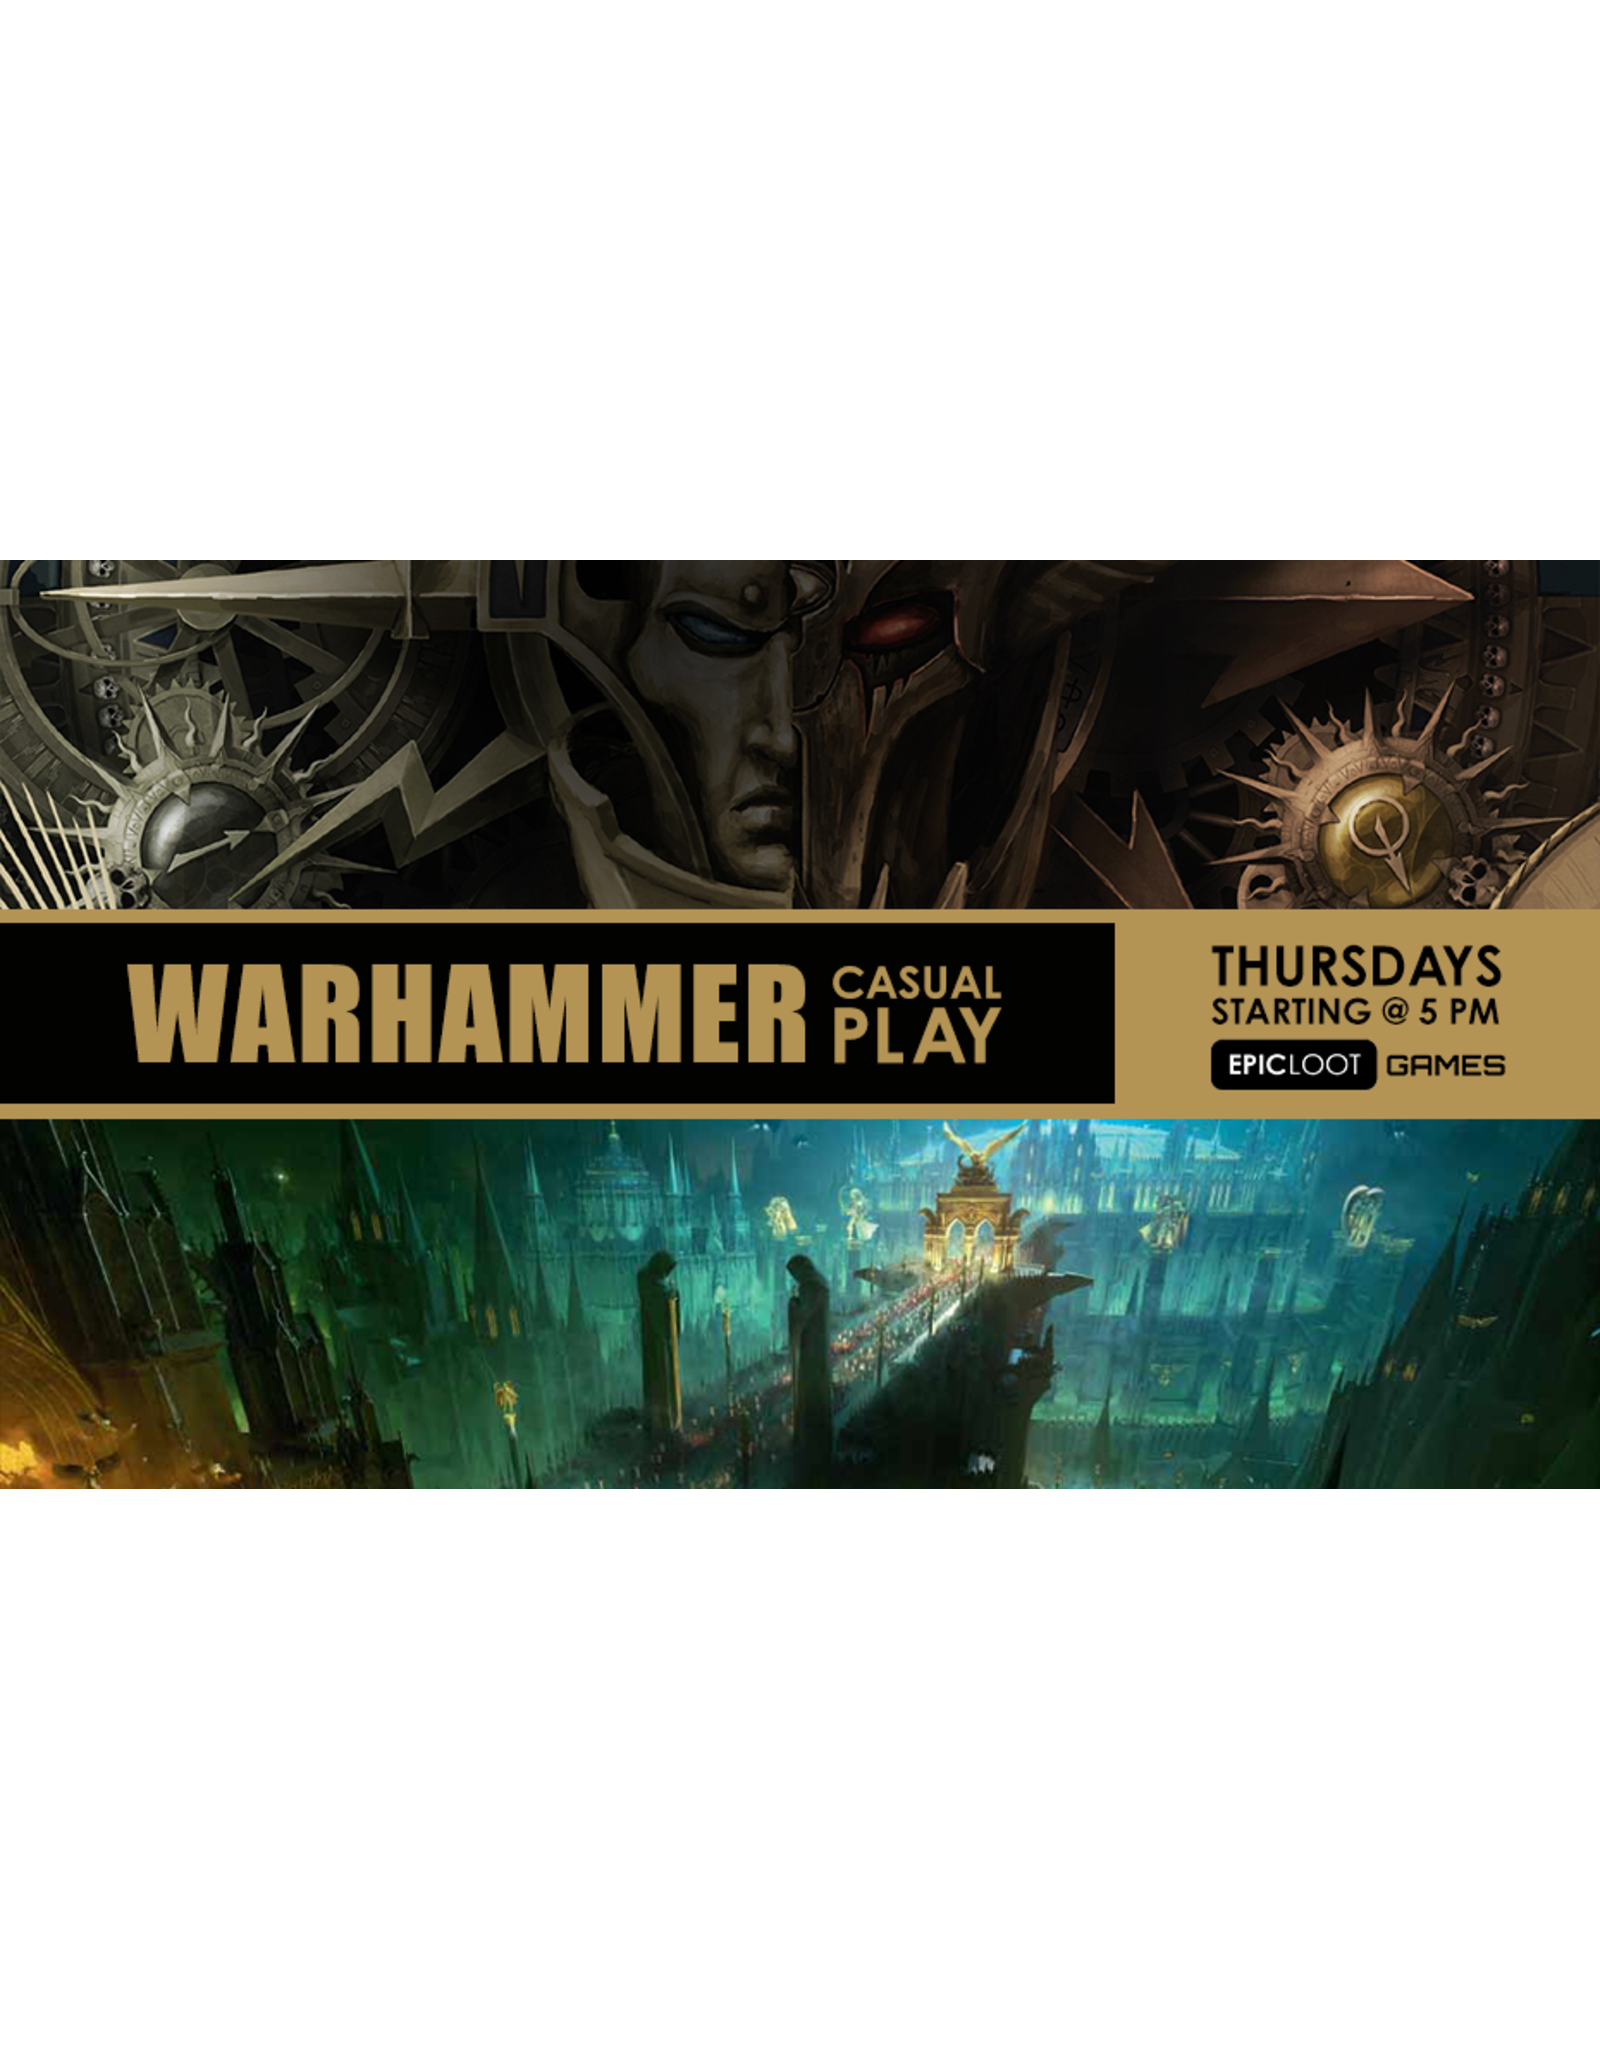 Thurs 05/09 12PM - 9PM Warhammer Casual Play